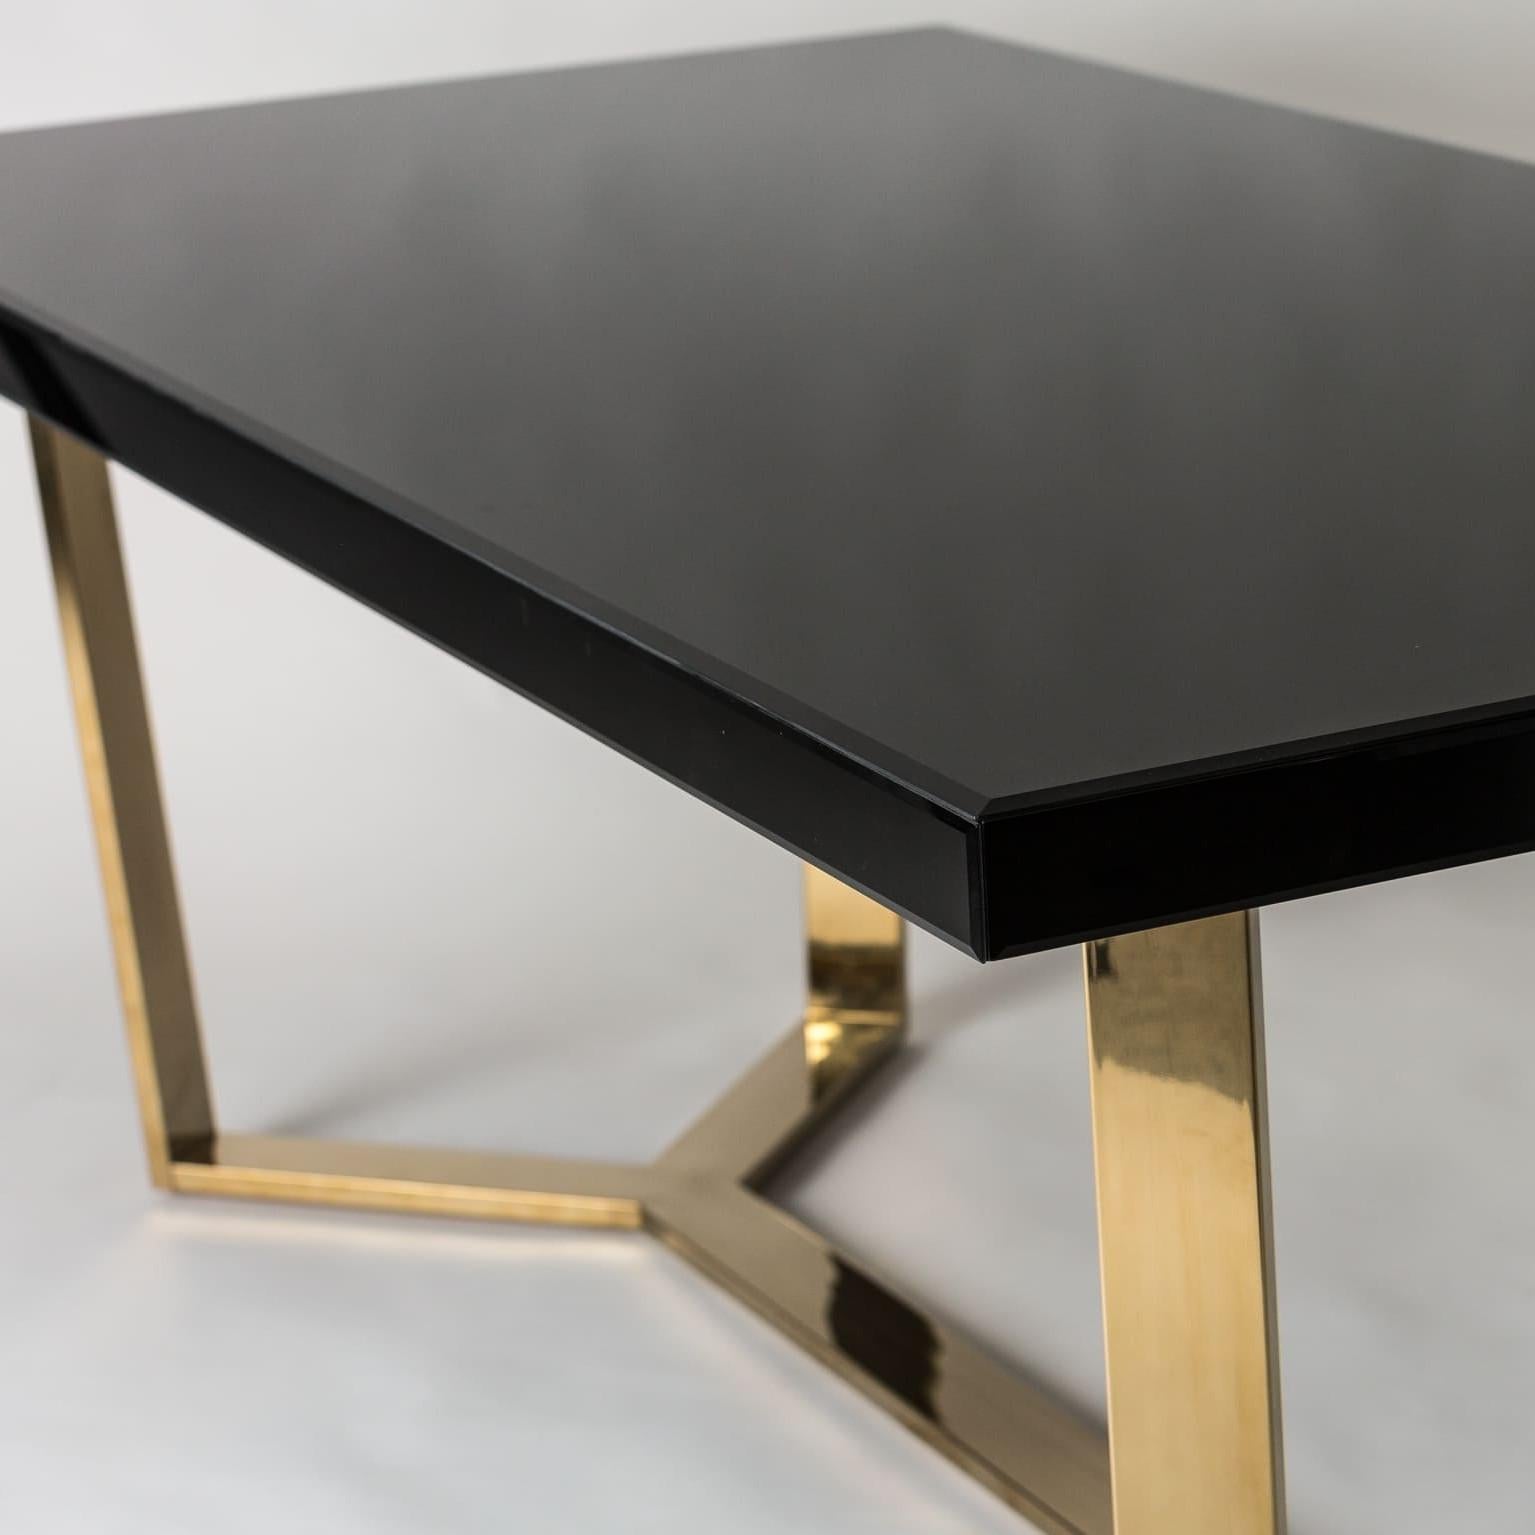 Bevelled and black mirrored glass tray with gilded metal base rectangular dining table; sophisticated and sparkling, you can use it as a desk too!